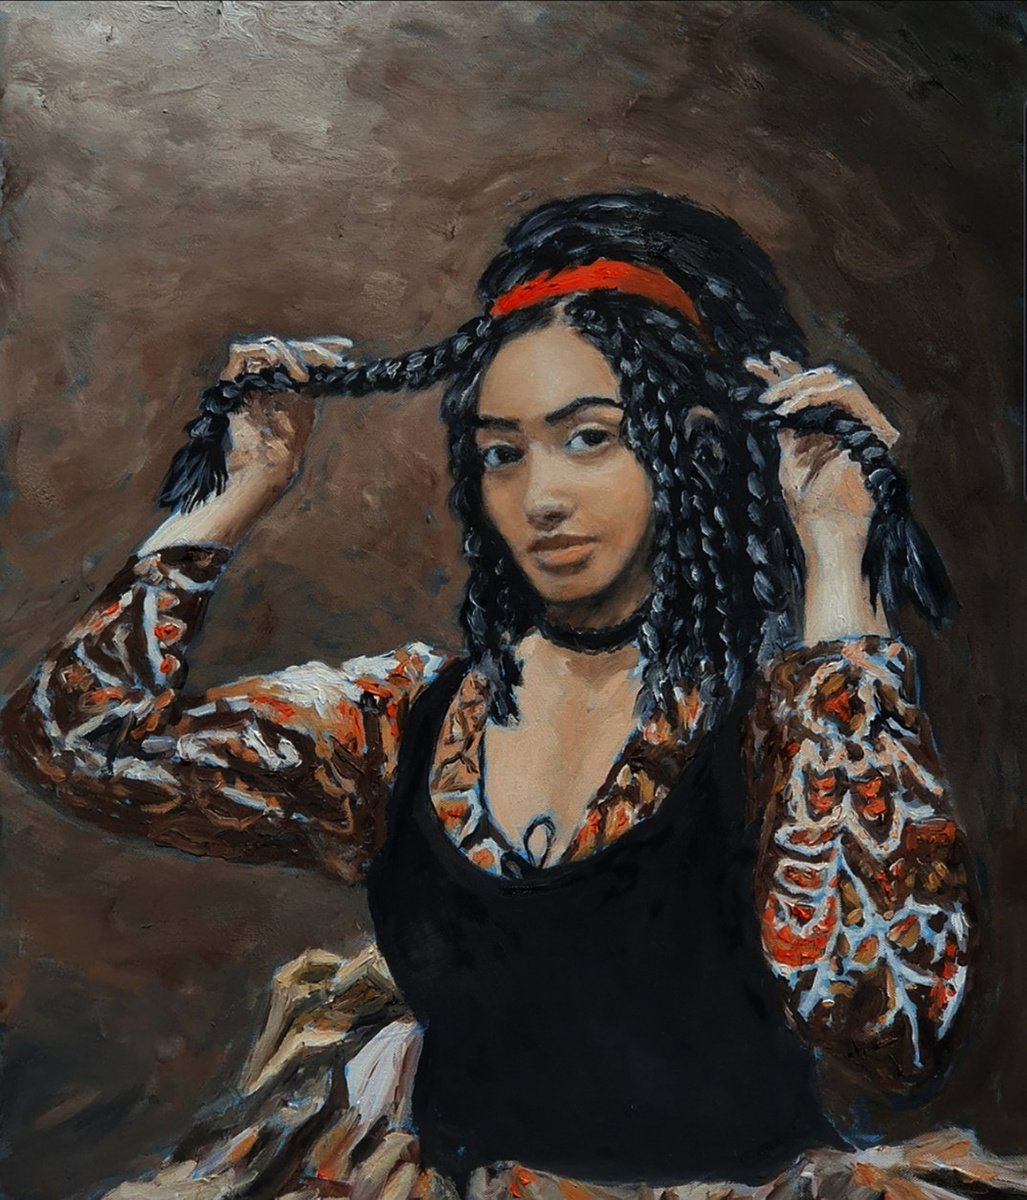 gypsy woman with braids by Colin Ross Jack